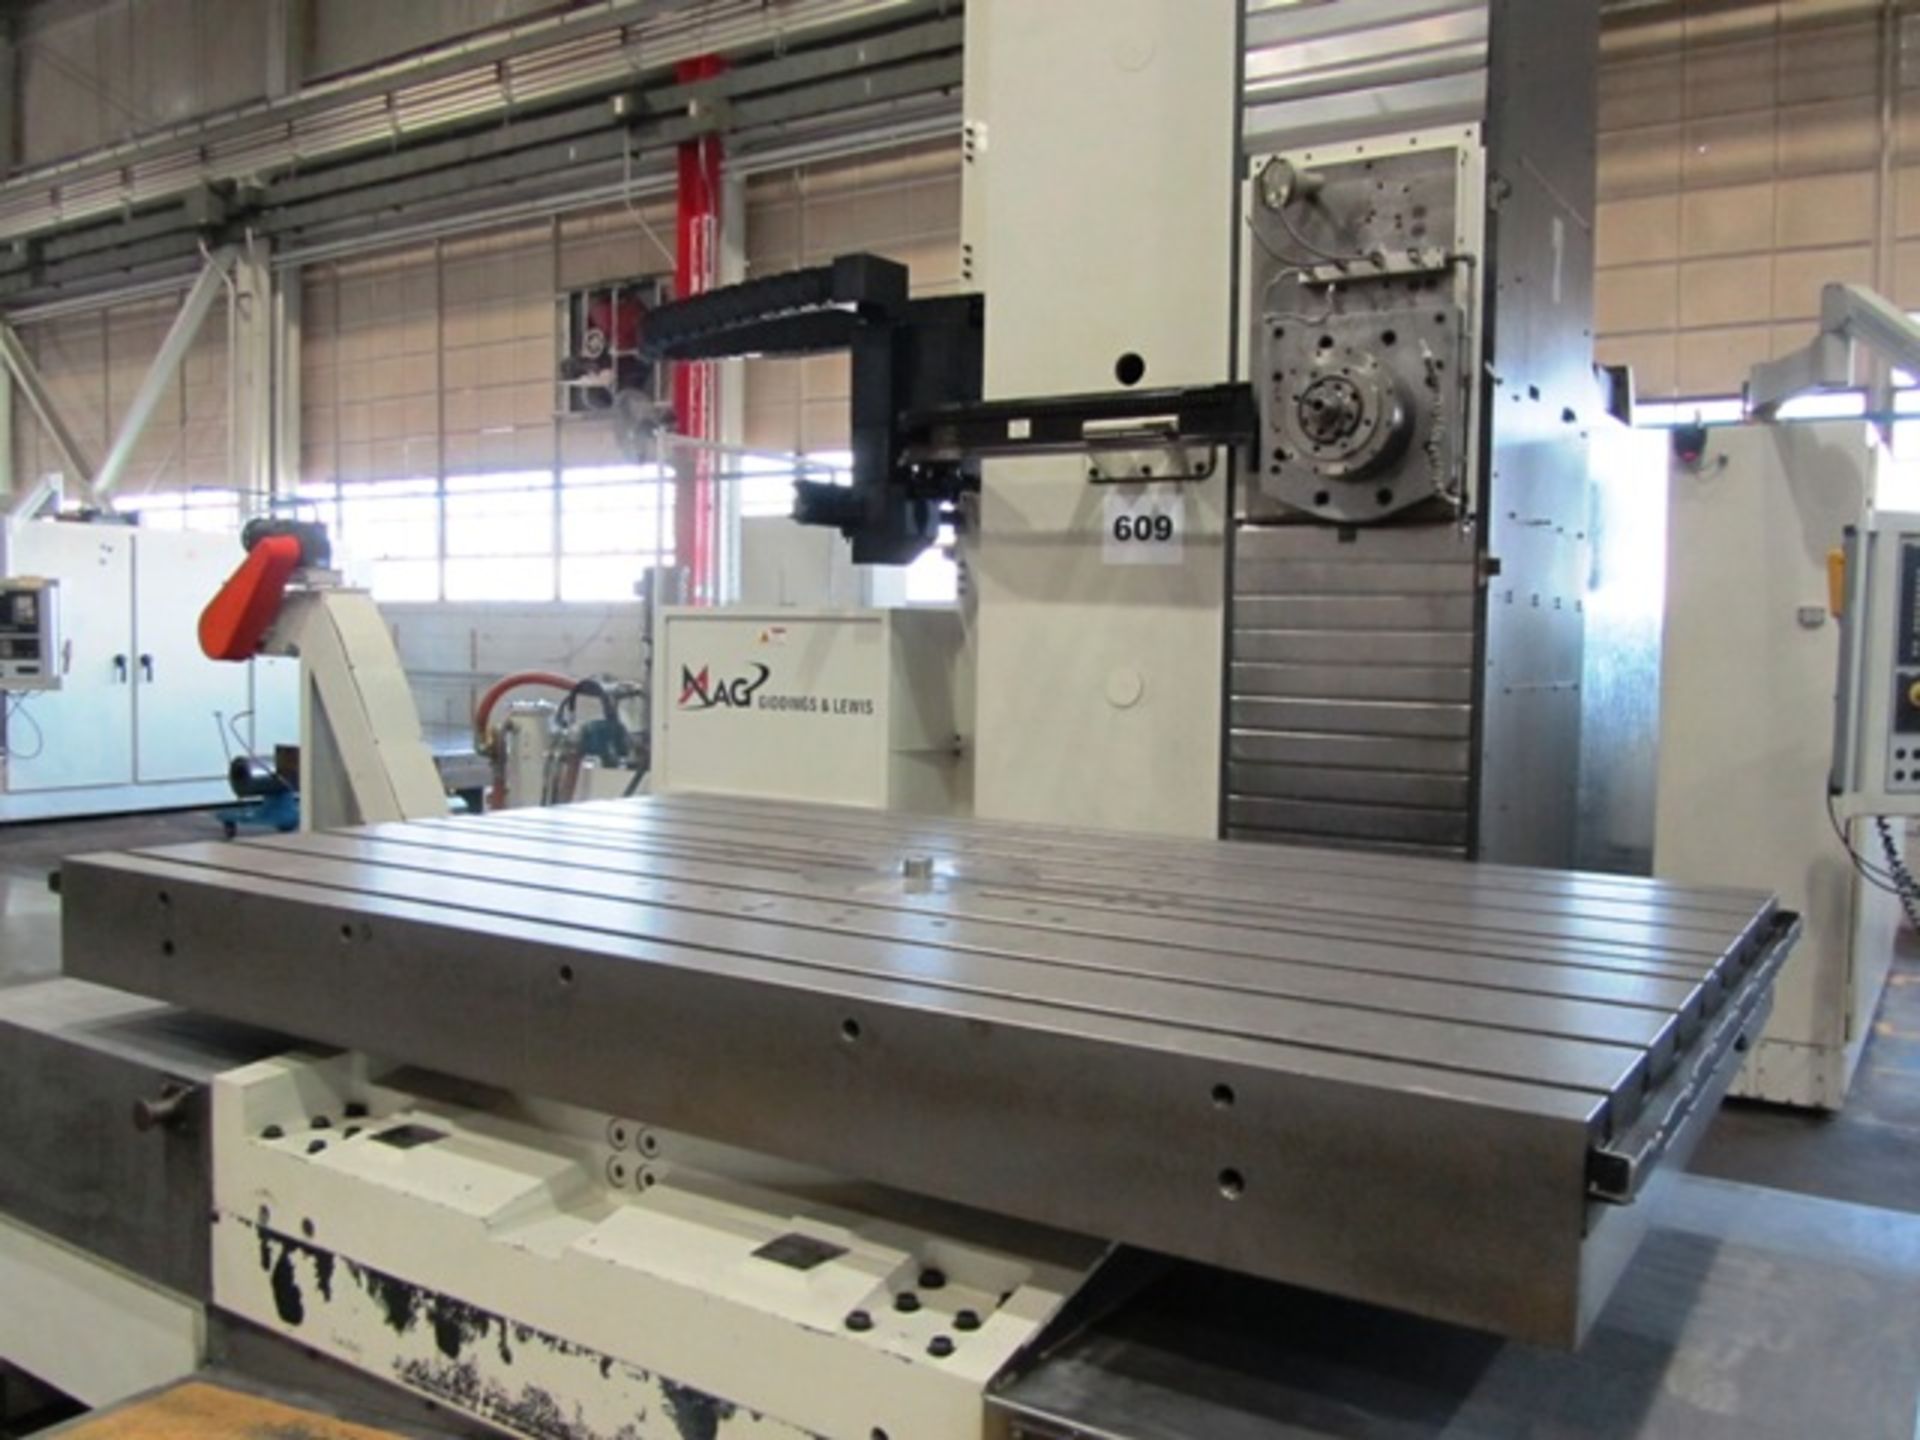 Giddings & Lewis Model RT 1600 6.1'' CNC Table Type Horizontal Boring Mill with 63'' x 98.4'' B-Axis - Image 4 of 4